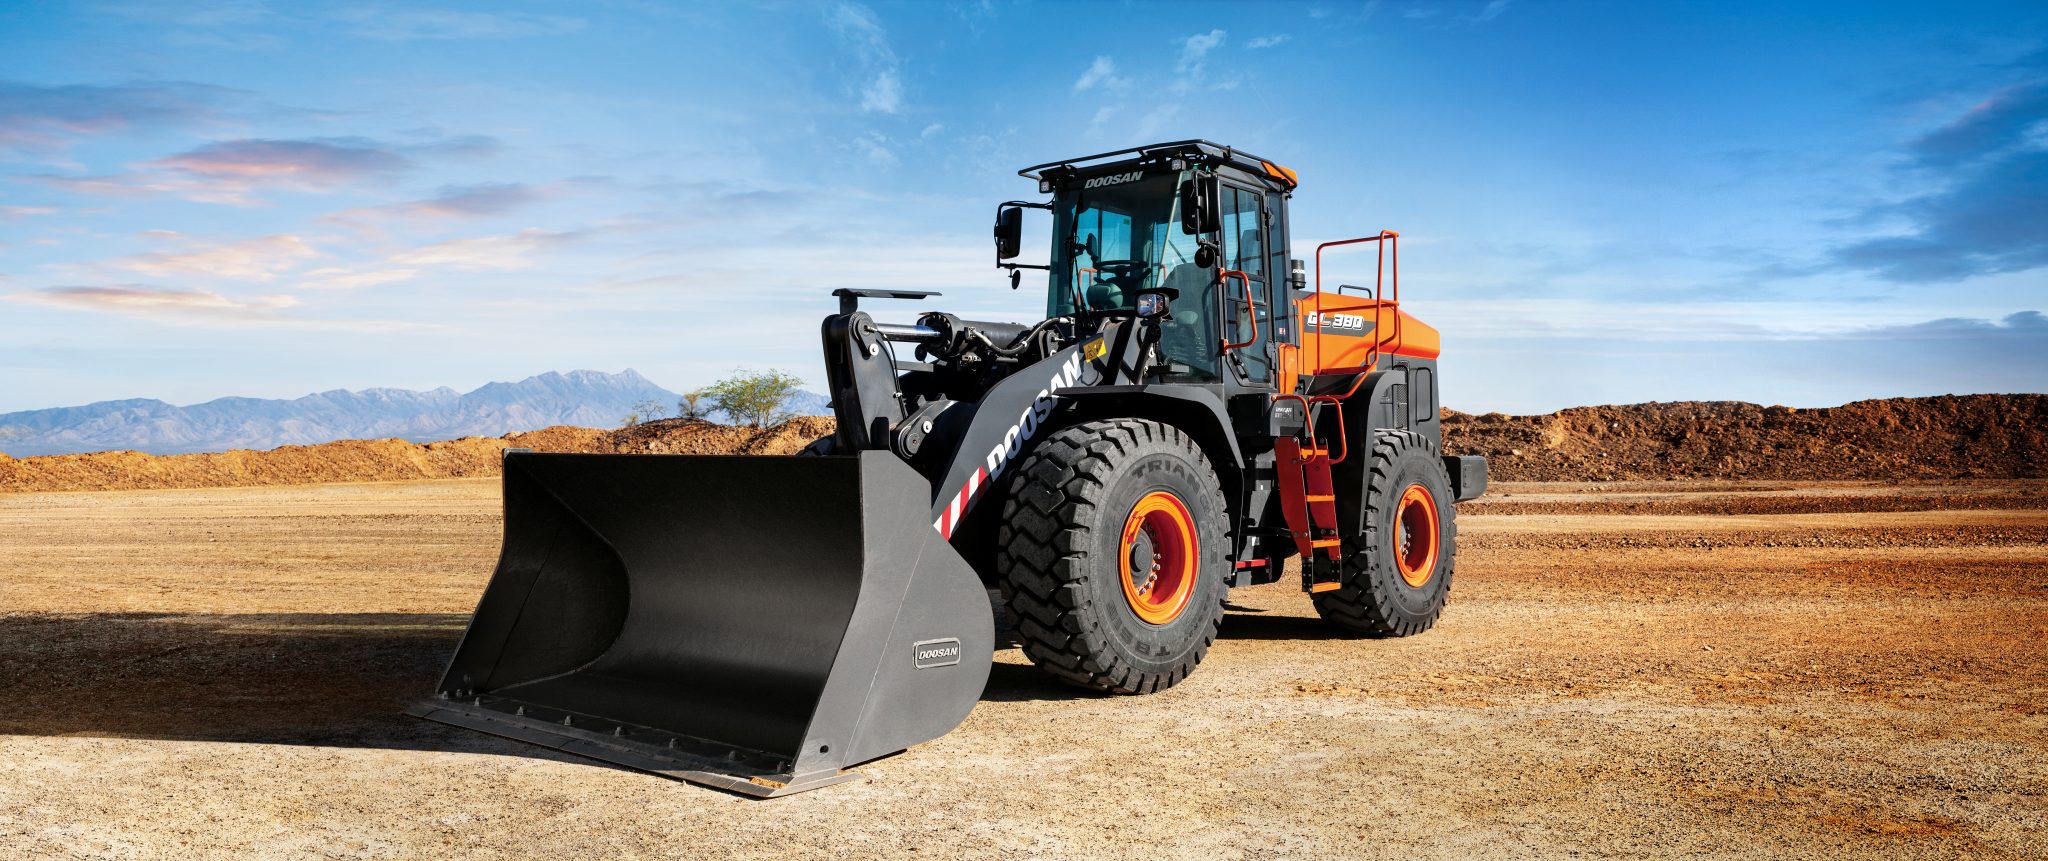 Doosan Infracores New Wheel Loader Model To Lift Greater Loads Rock To Roadrock To Road 4625